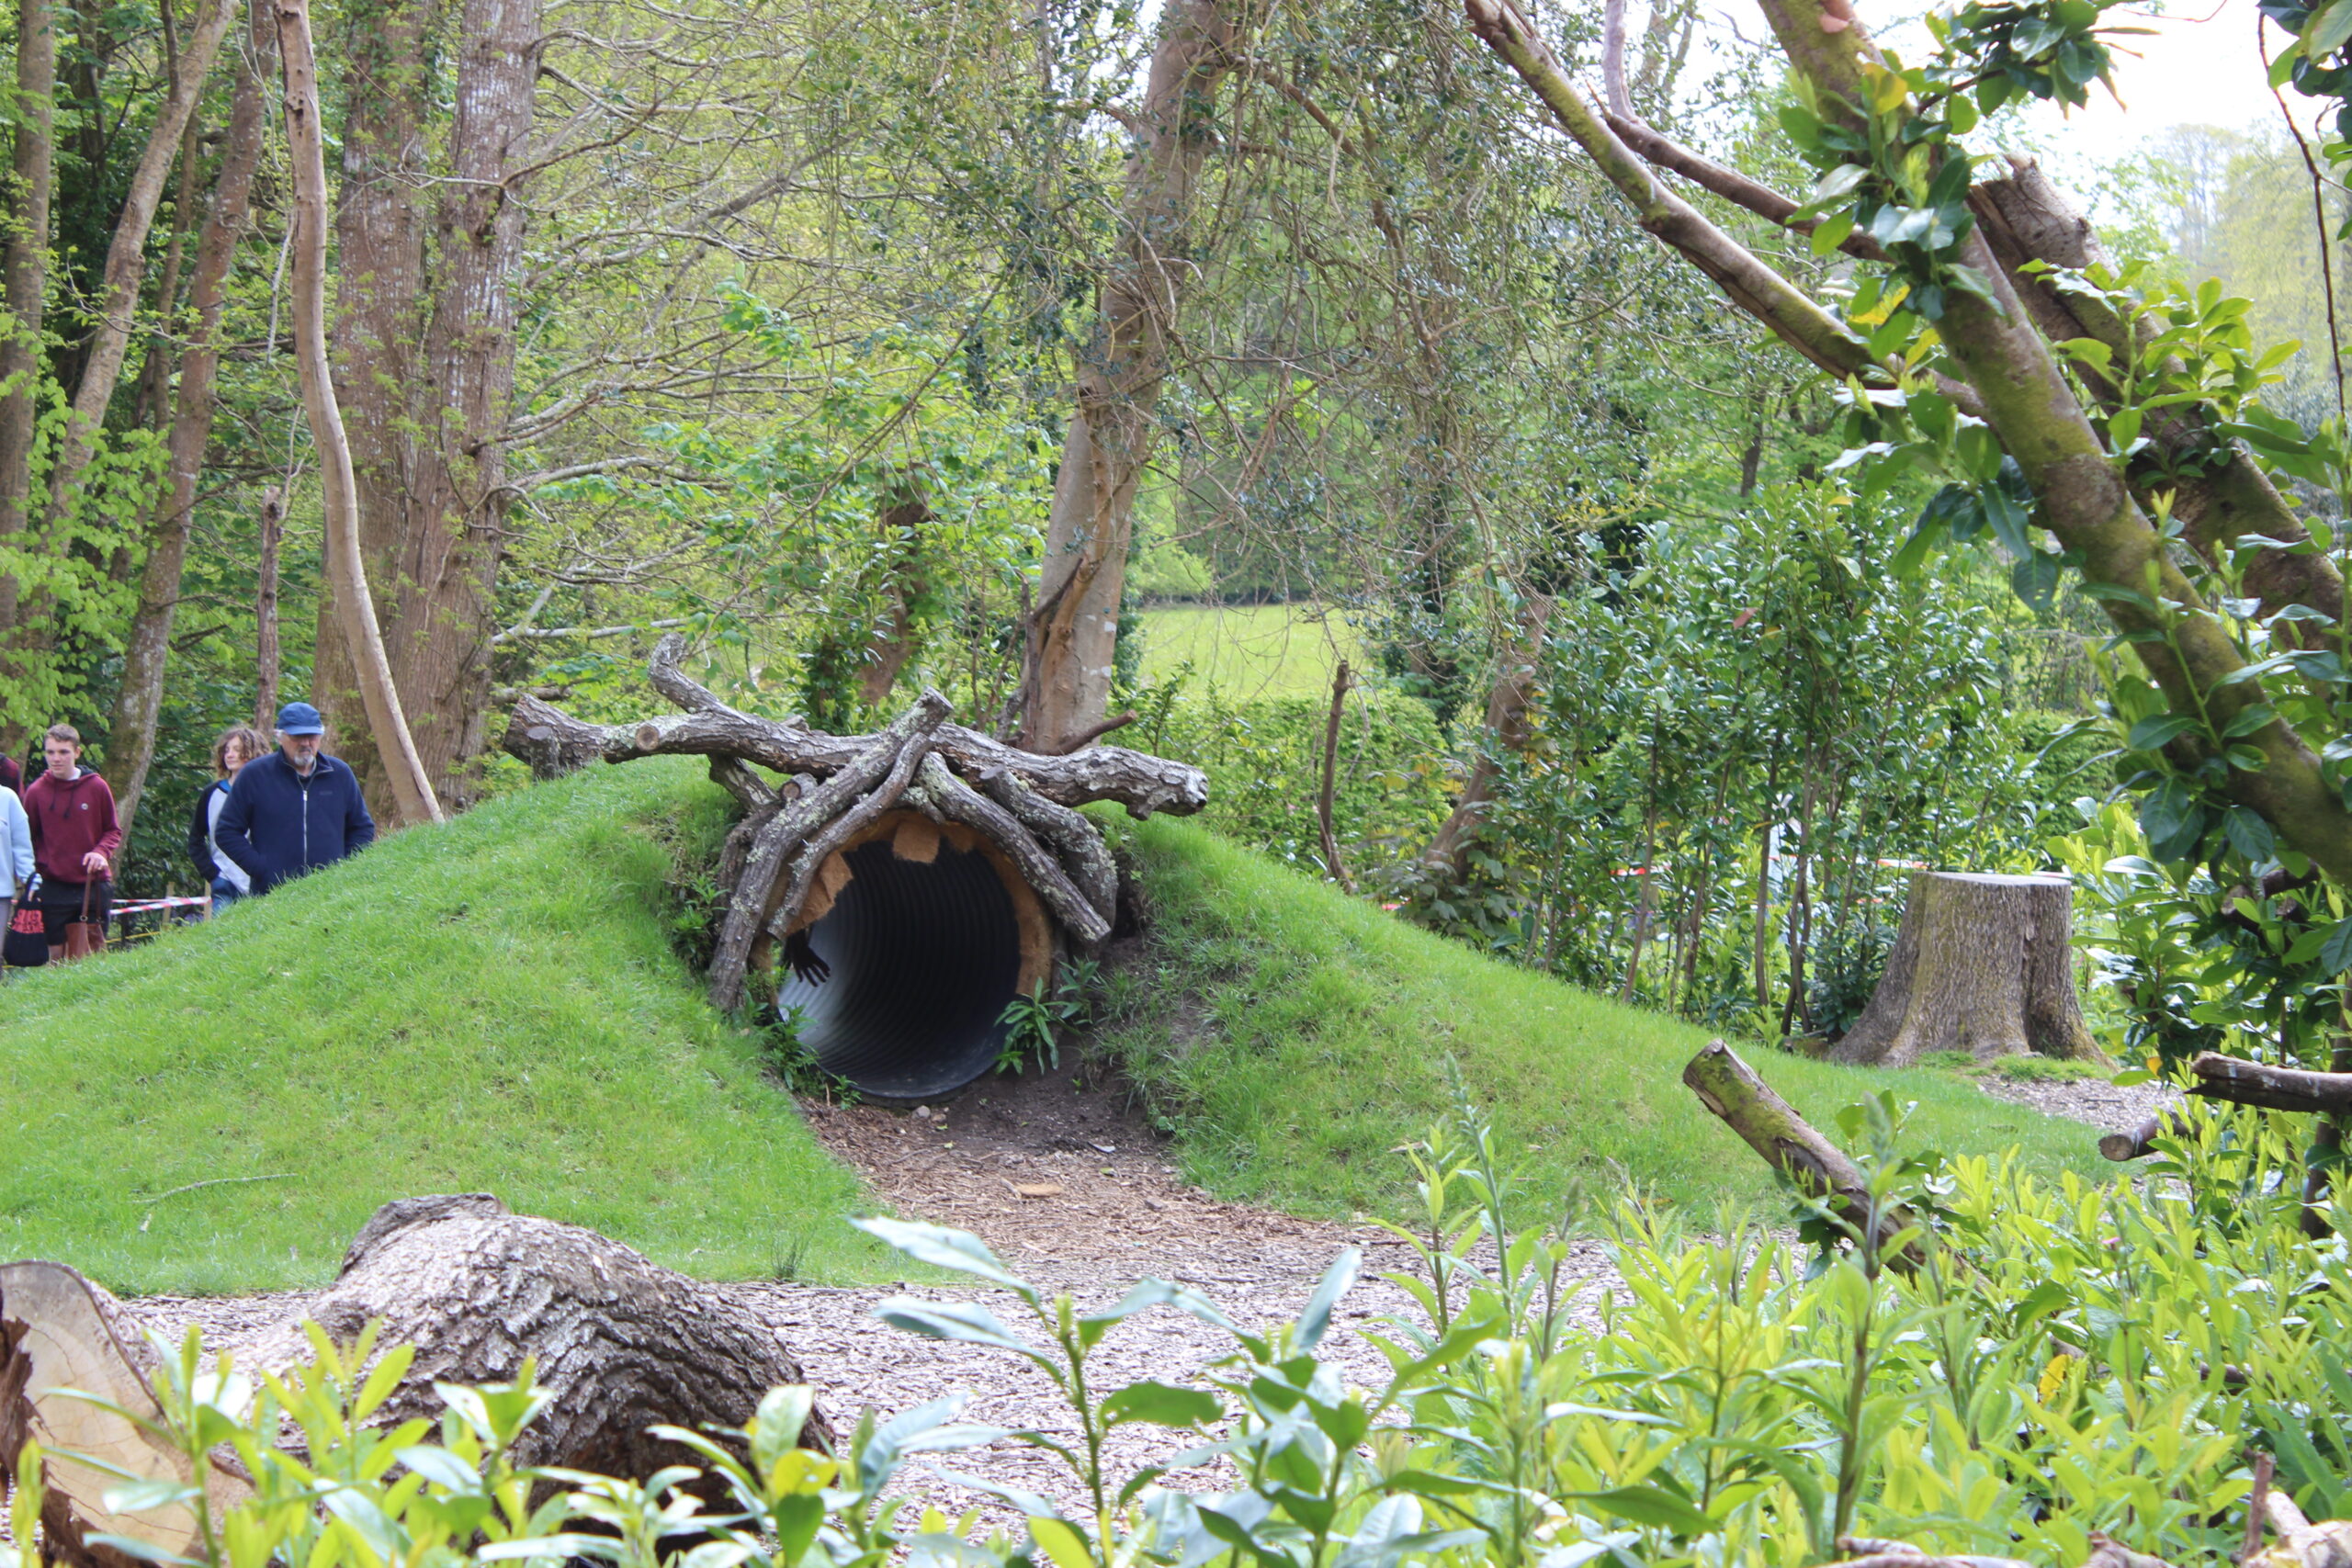 The Burrow play area at Enys Gardens